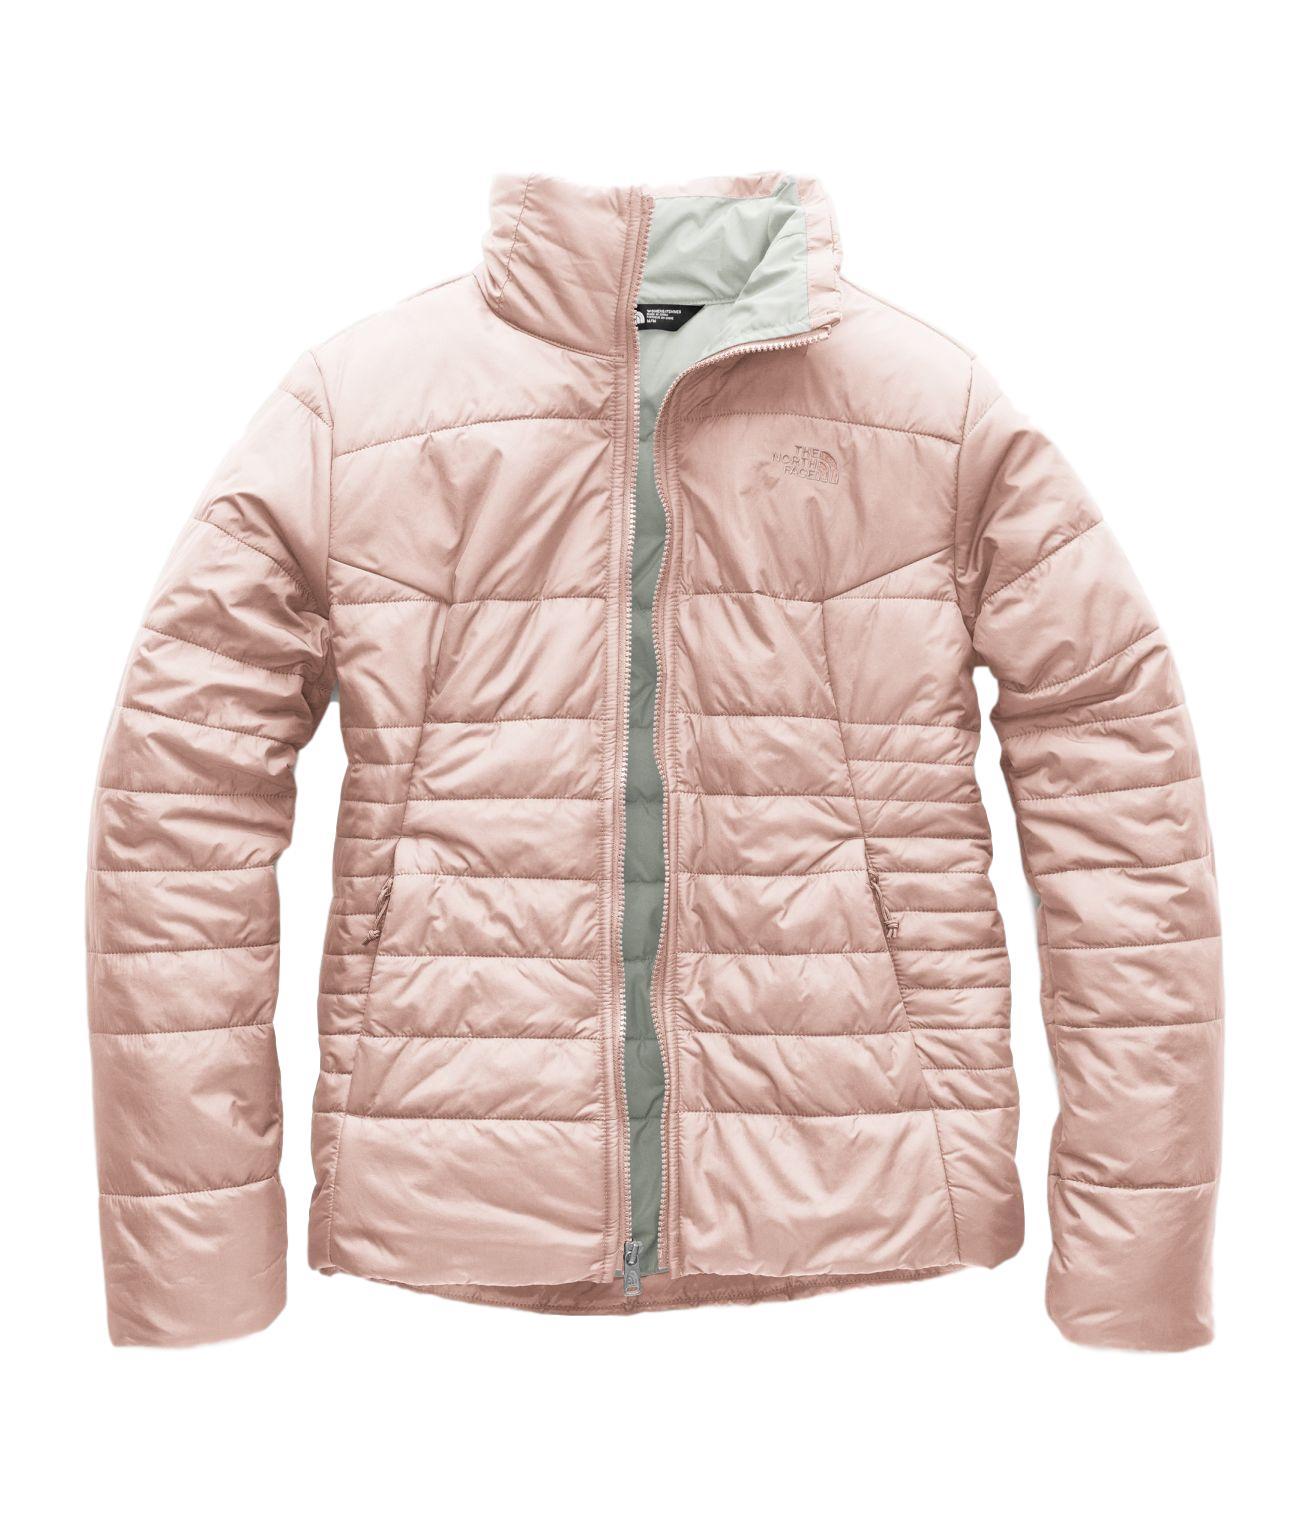 north face women's harway jacket